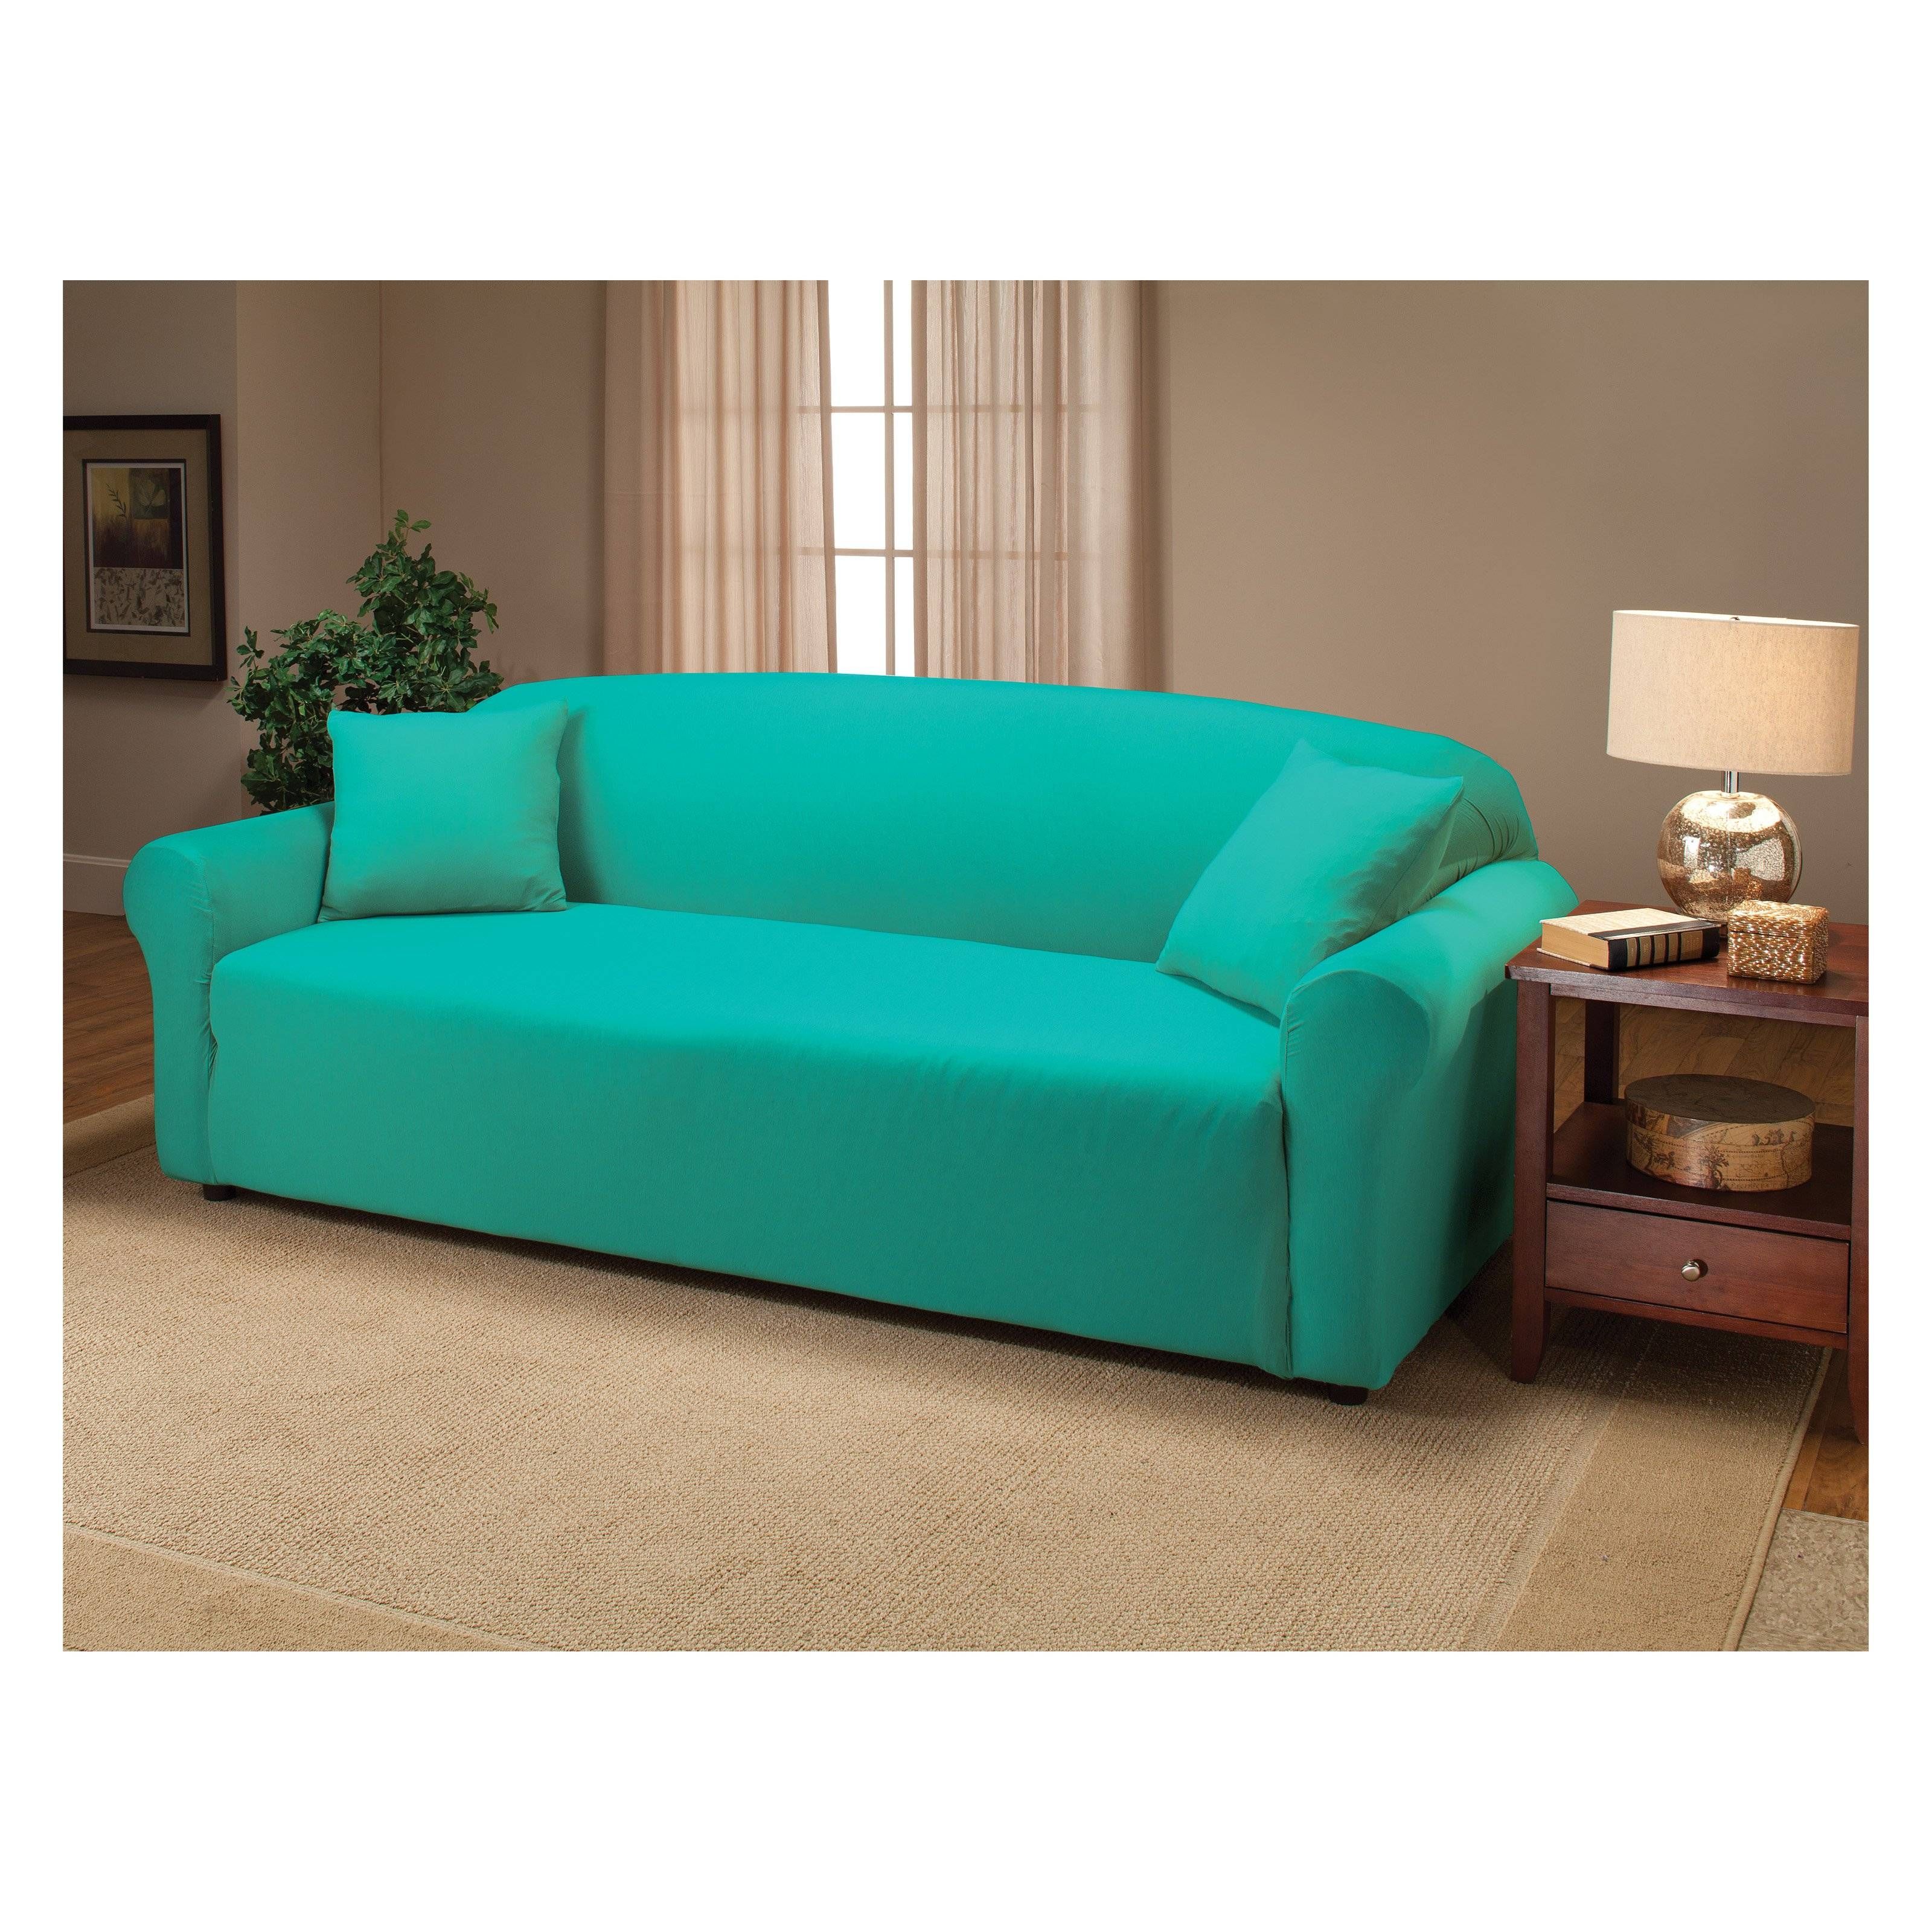 Featured Photo of 30 Best Collection of Turquoise Sofa Covers